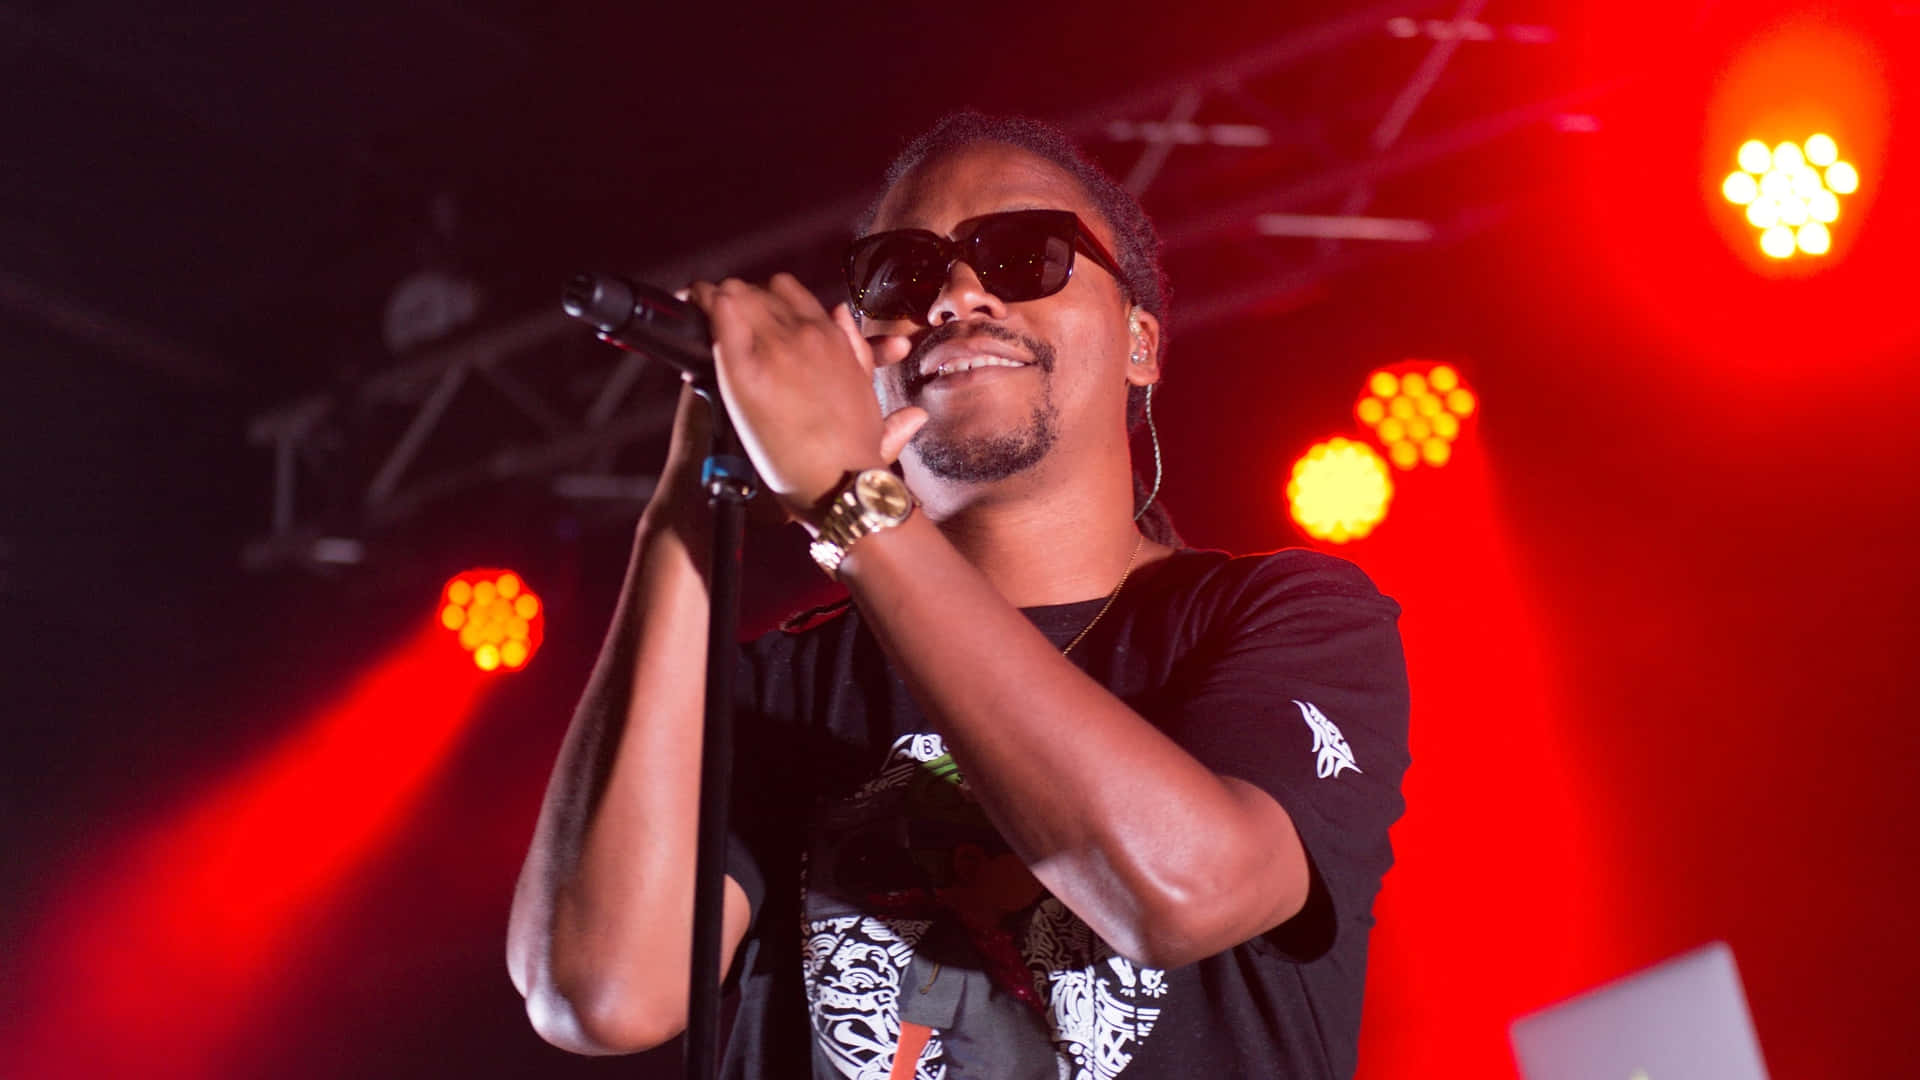 Lupe Fiasco Performing Liveon Stage Wallpaper